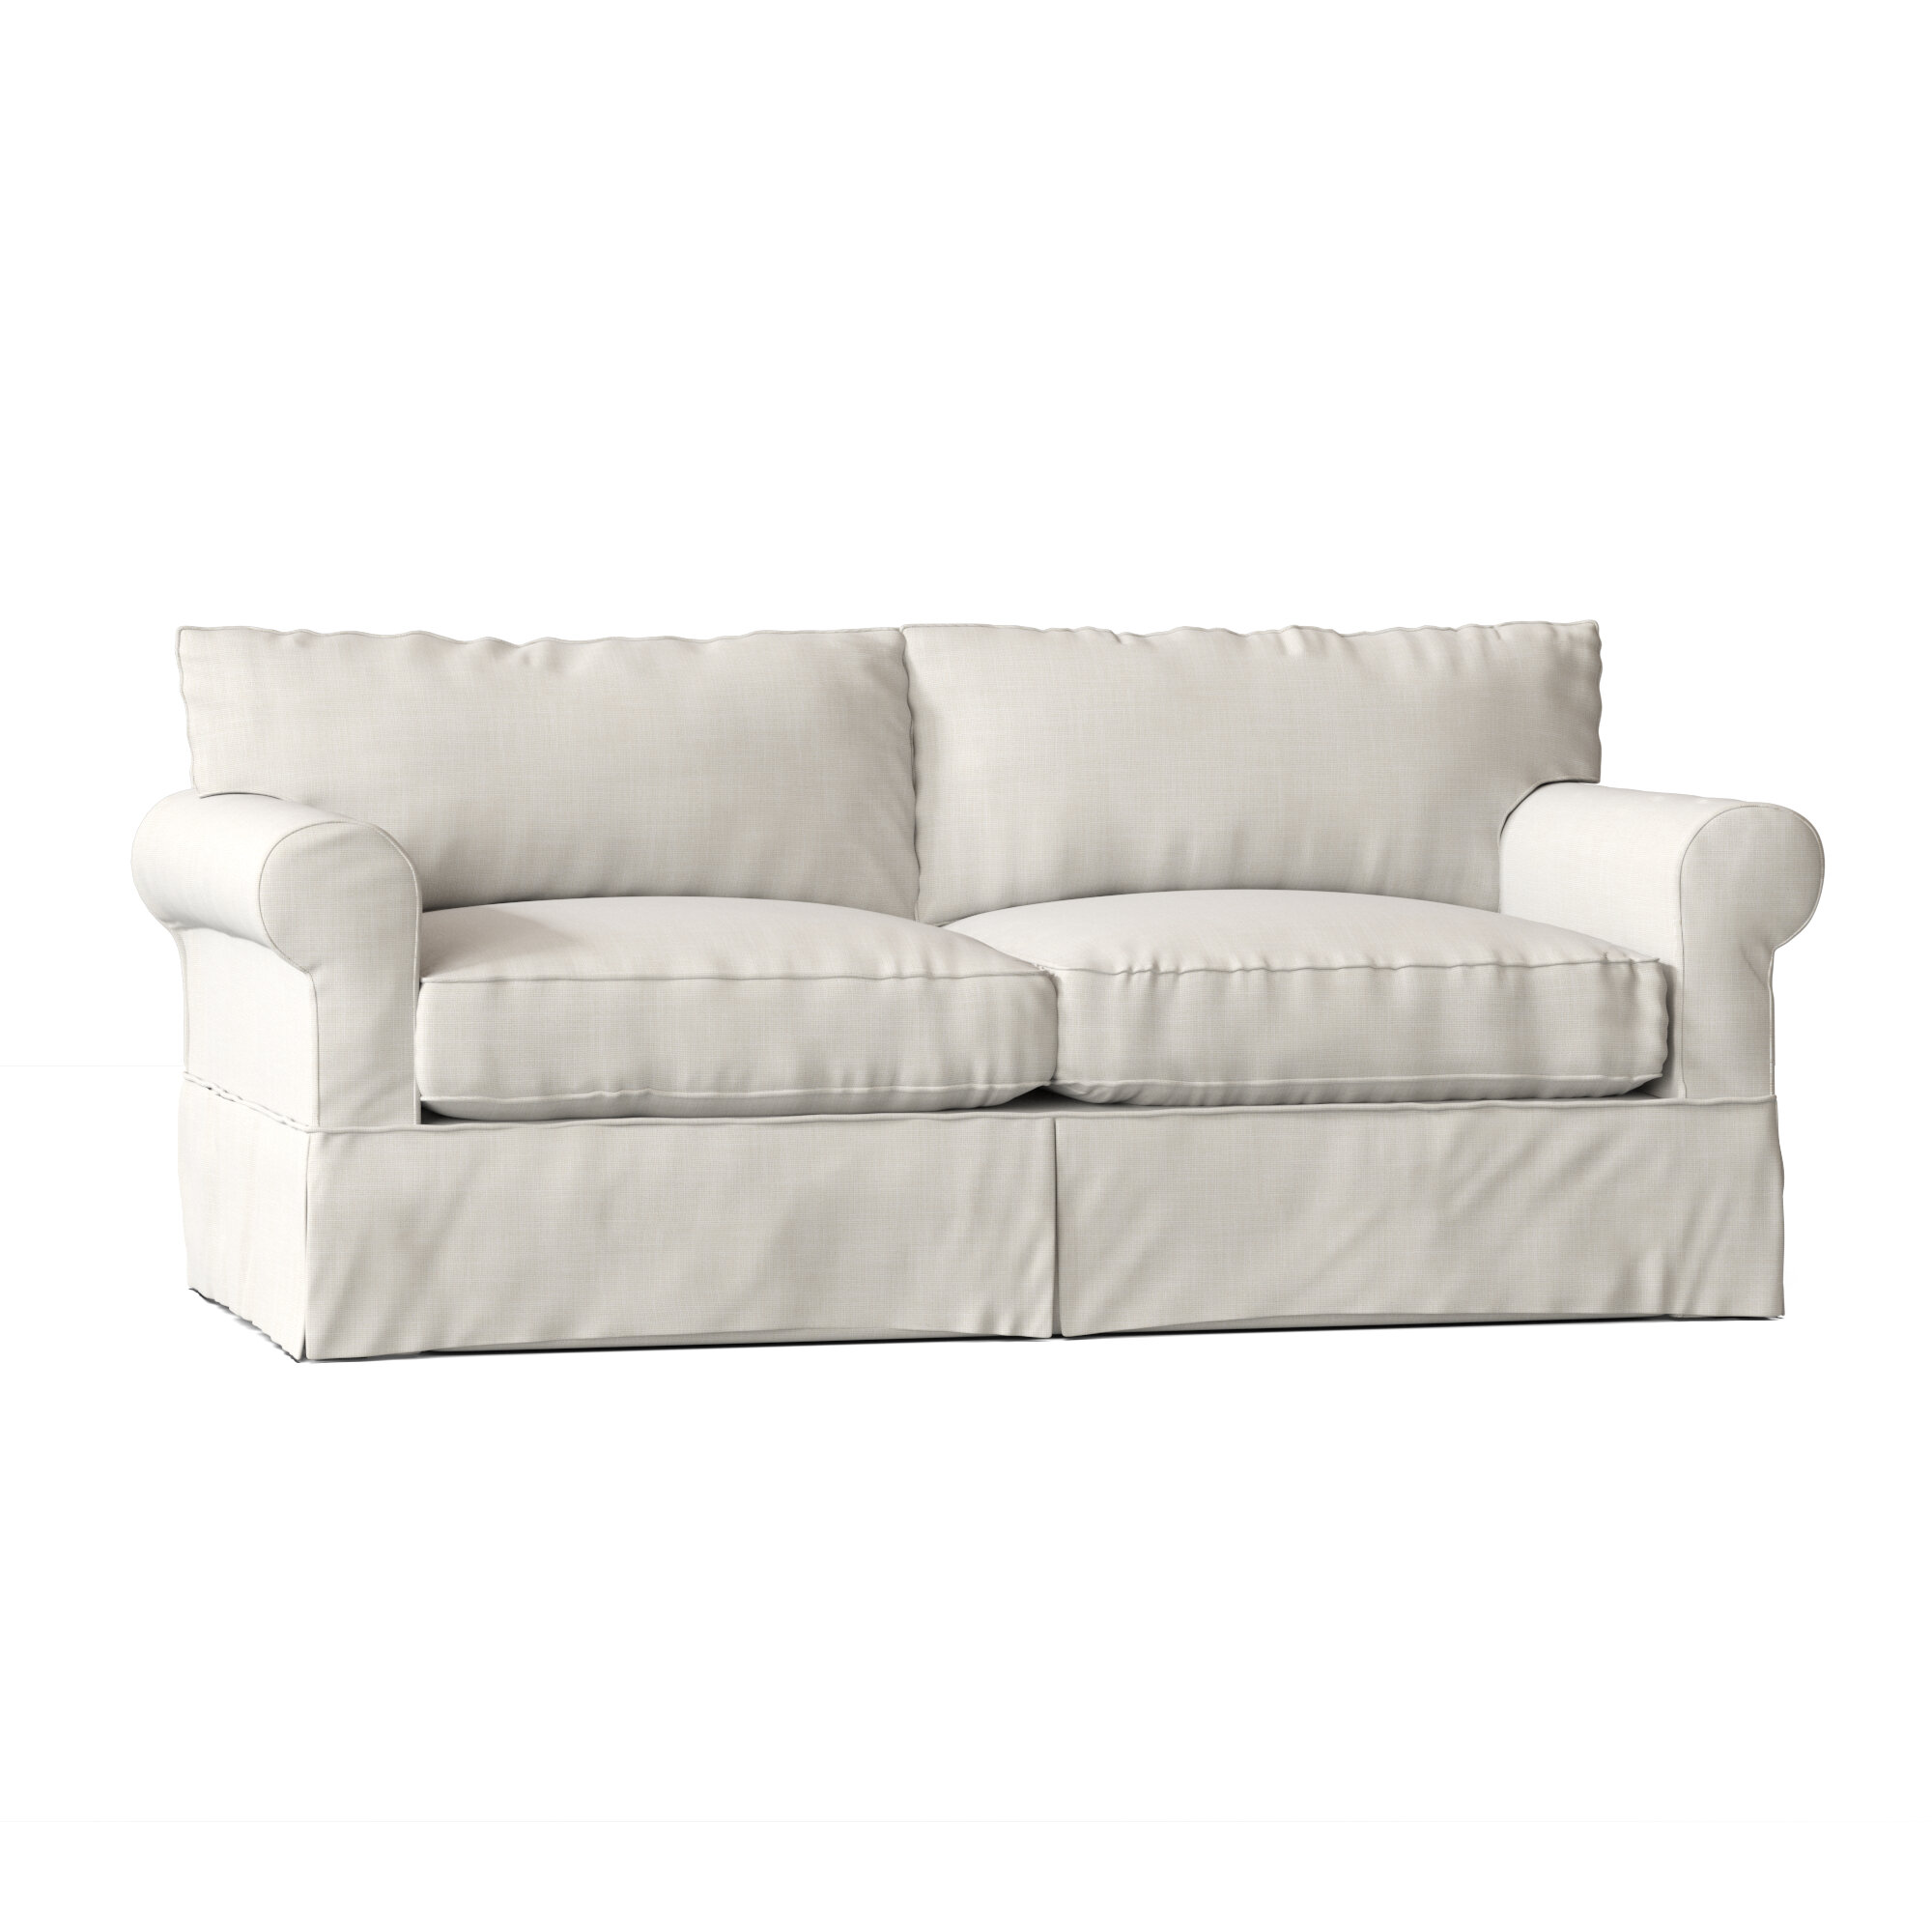 Amari 84” Rolled Arm Slipcovered Sofa with Reversible Cushions